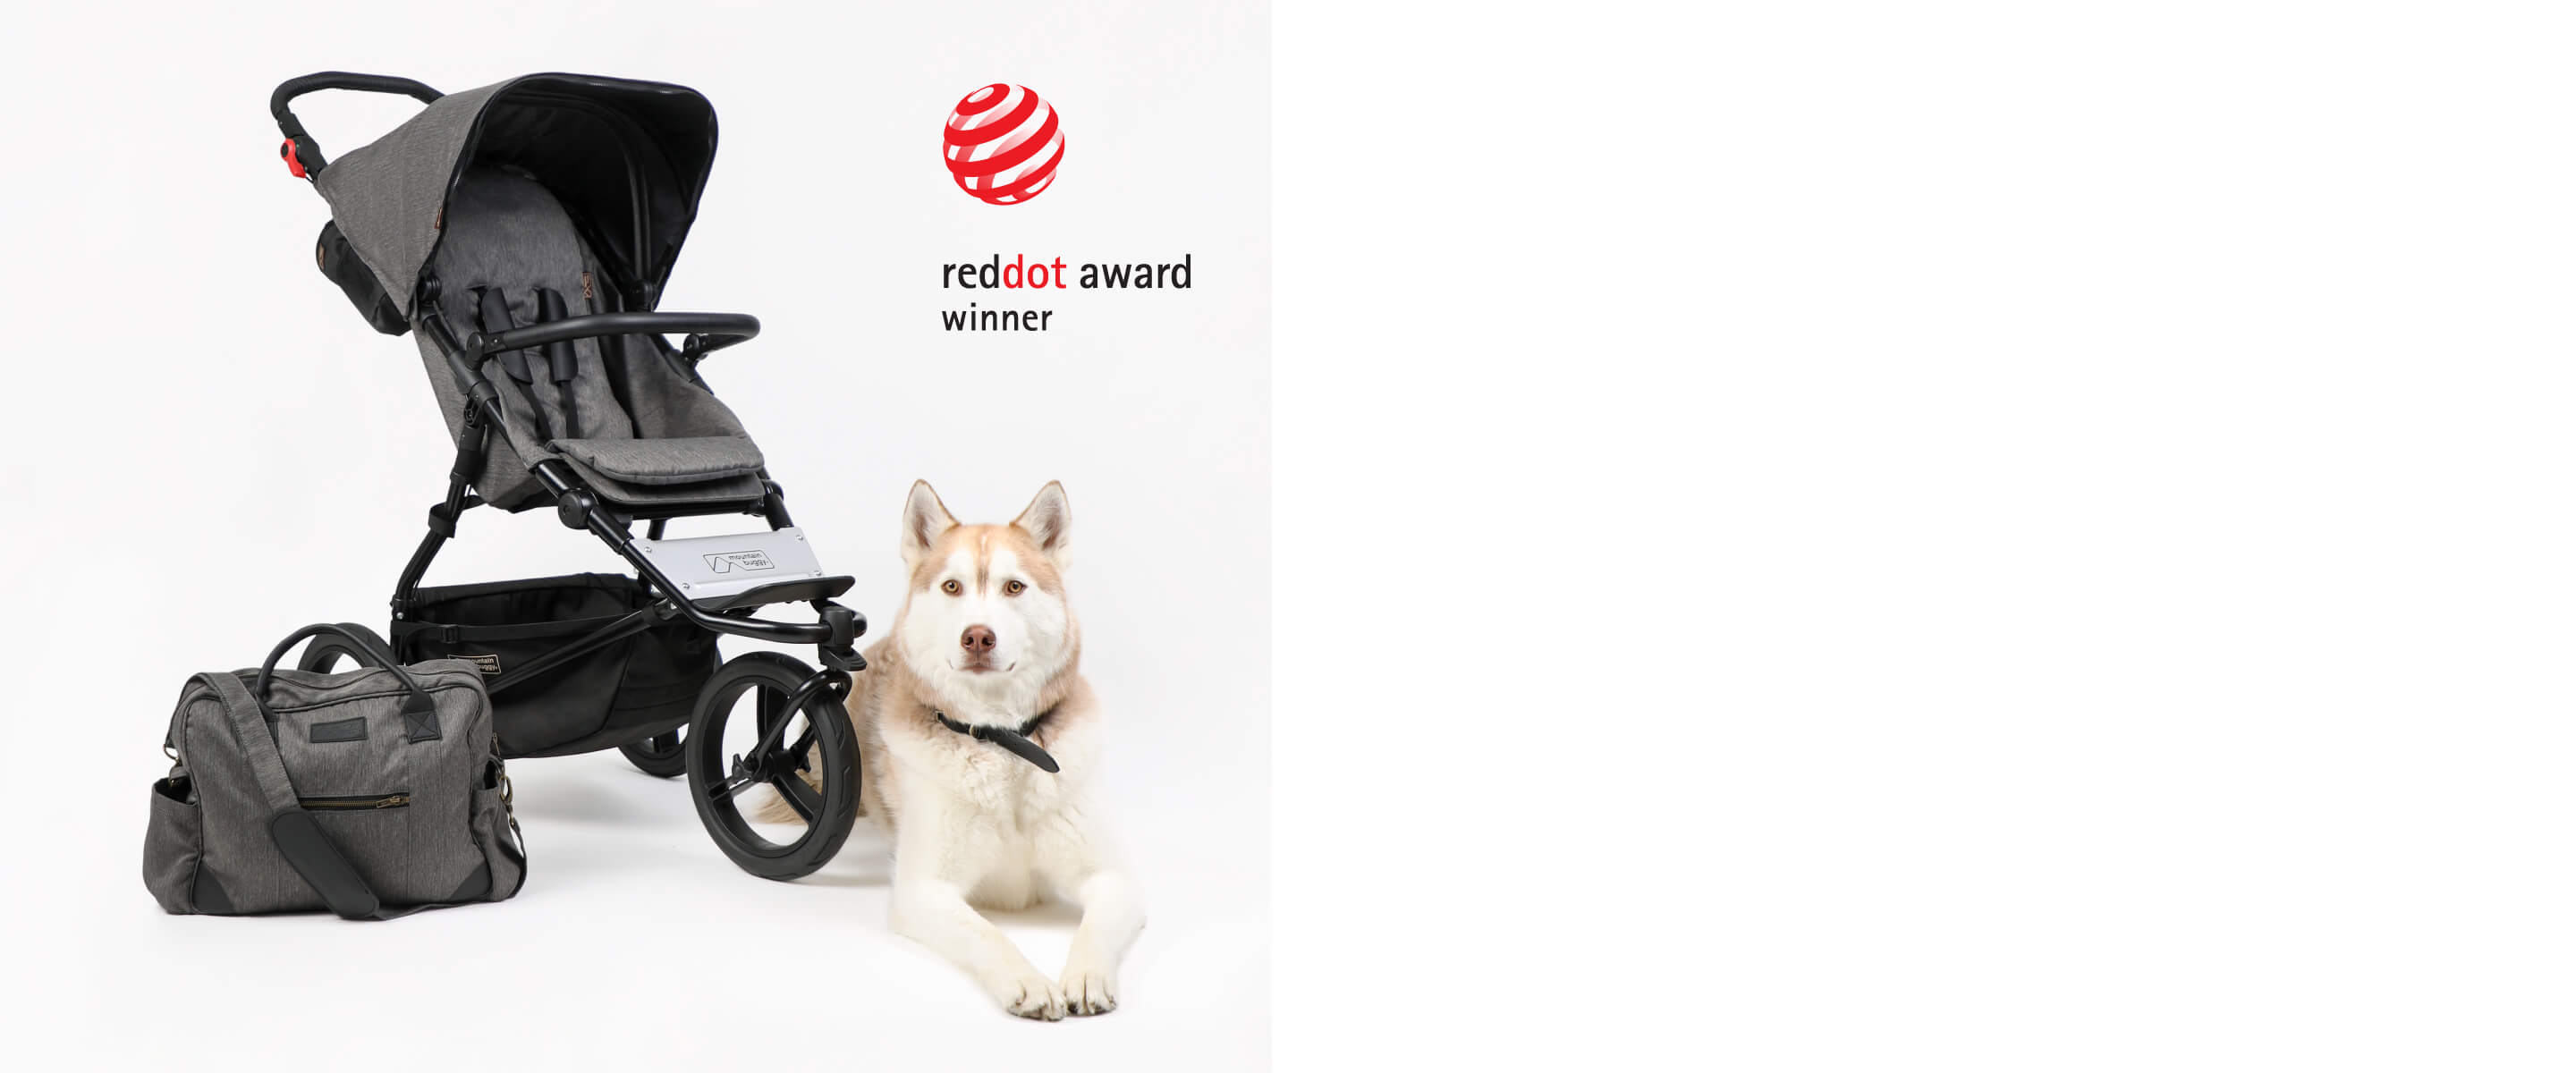 Red Dot award winnera thoughtful bundle from newborn to toddlercomplimentary warrantyparent facing options in one luxurious bundleworld class in safety and stability